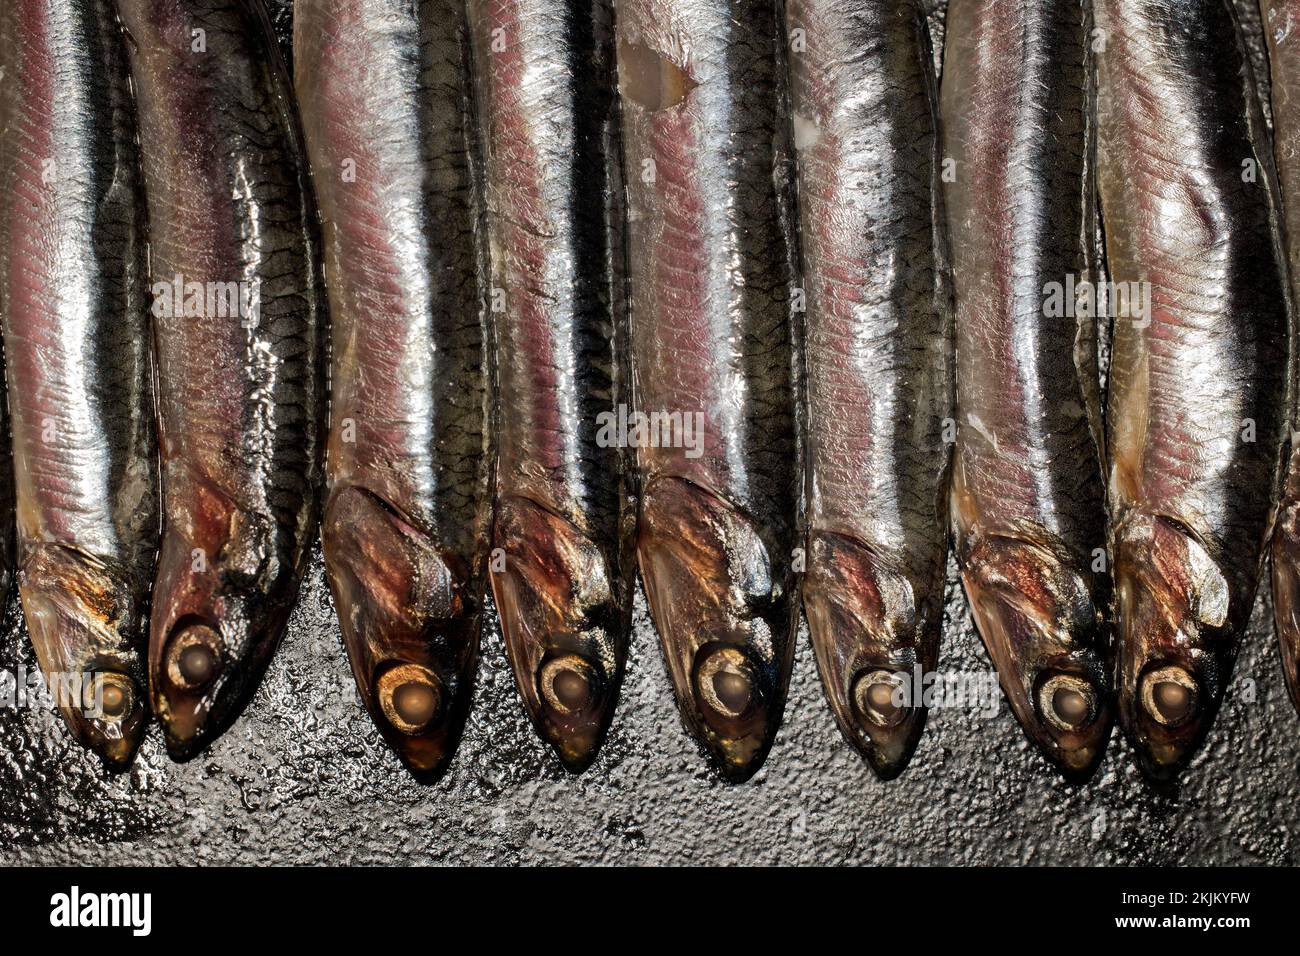 Anchovies, european anchovy (Engraulis encrasicolus) anchovies, food photography Stock Photo